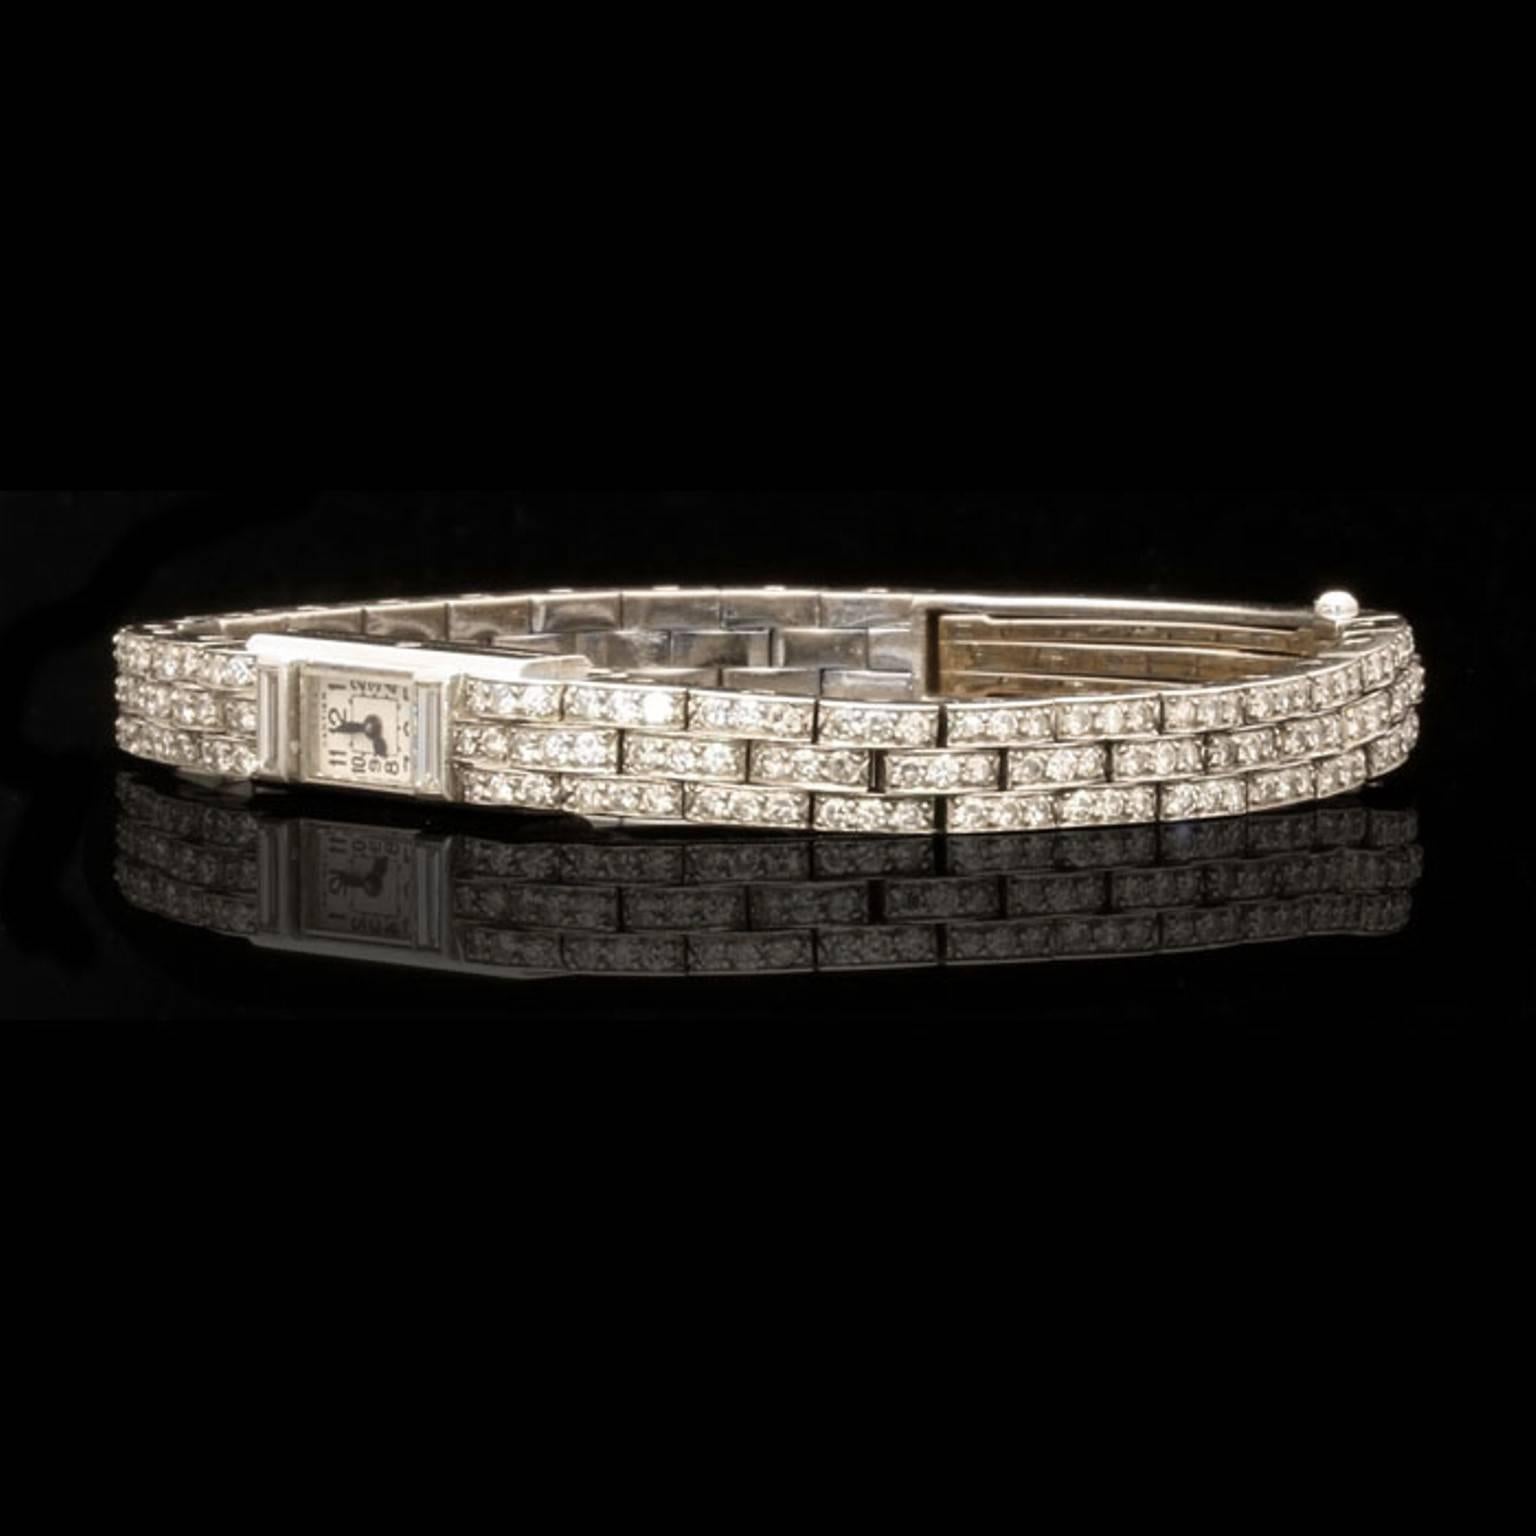 The elegant ladies watch composed of three rows of articulated rectangular links to a rectangular white dial with black Arabic numerals and hands, signed Cartier.

Single cut diamonds estimated to weigh a total of approximately 2.8cts

Platinum